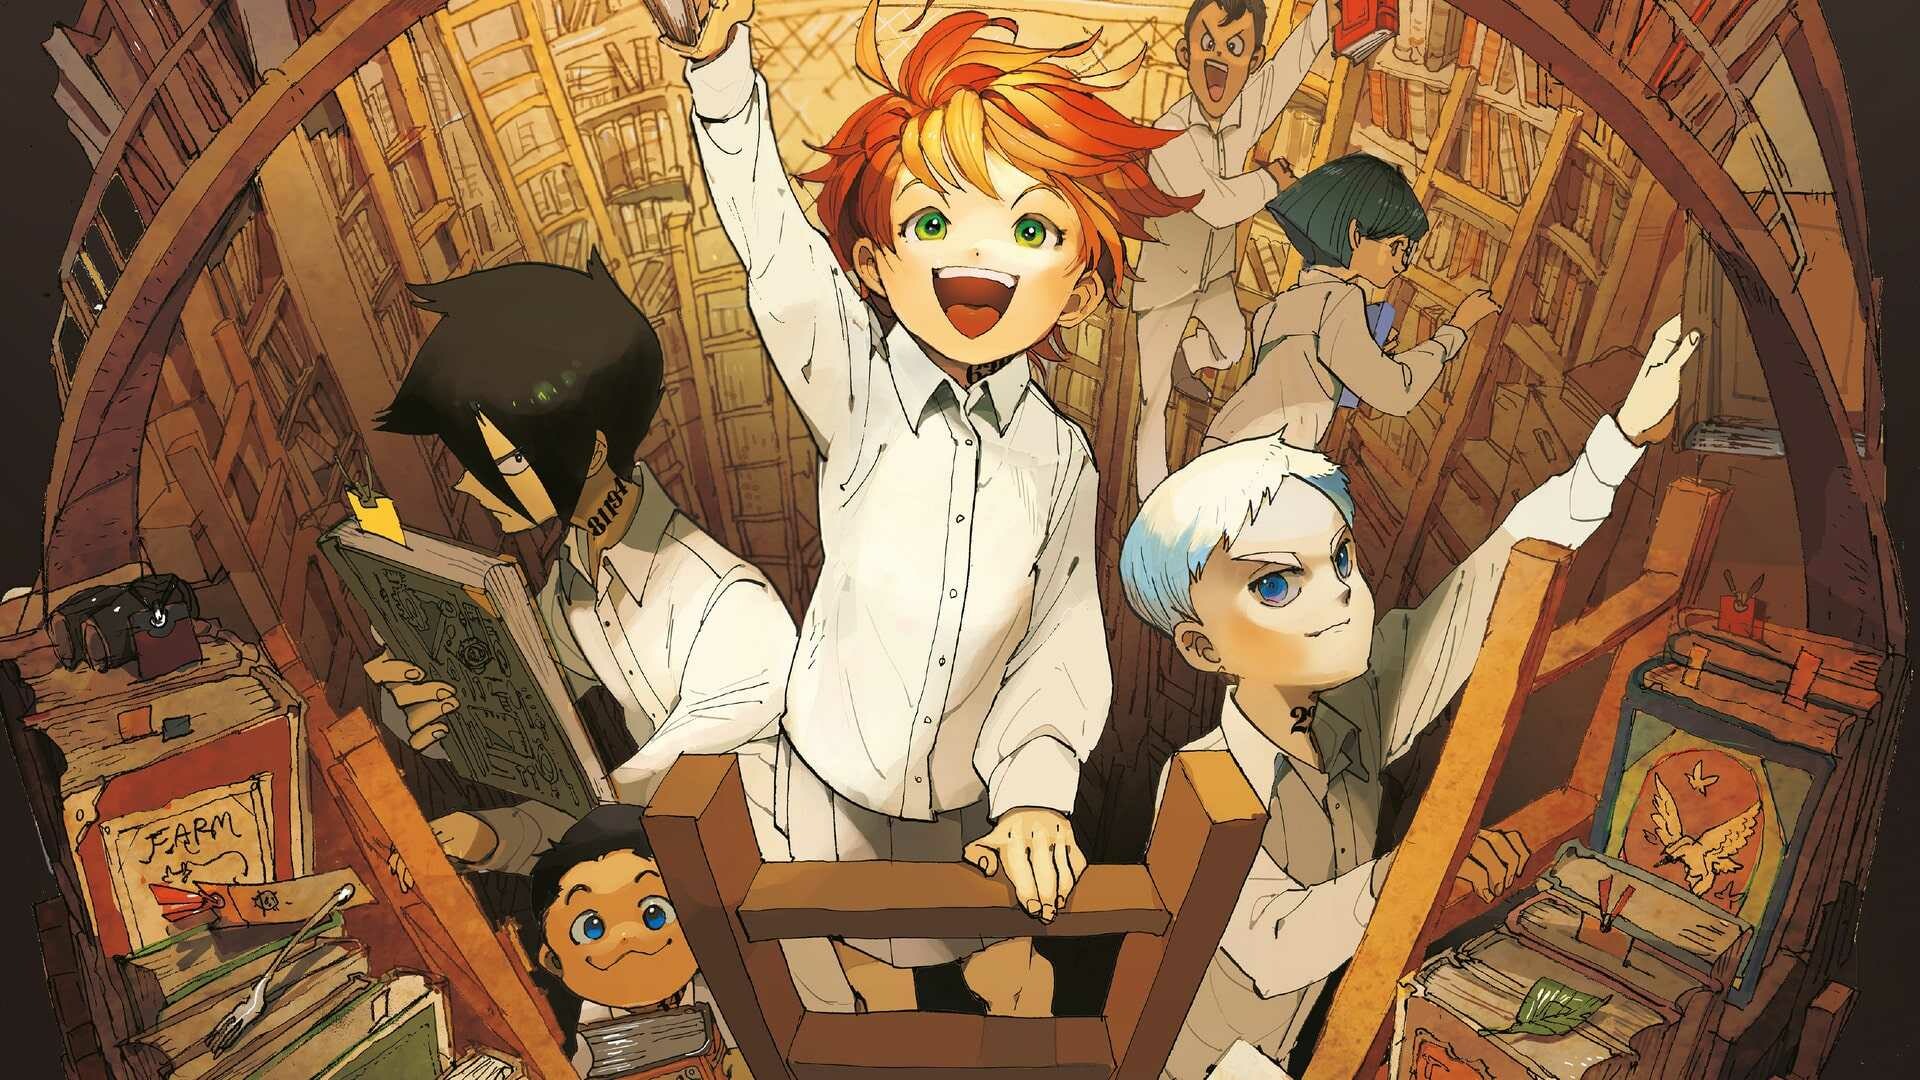 The Promised Neverland: Received Daruma for Best New Series at the Japan Expo Awards 2019. 1920x1080 Full HD Wallpaper.